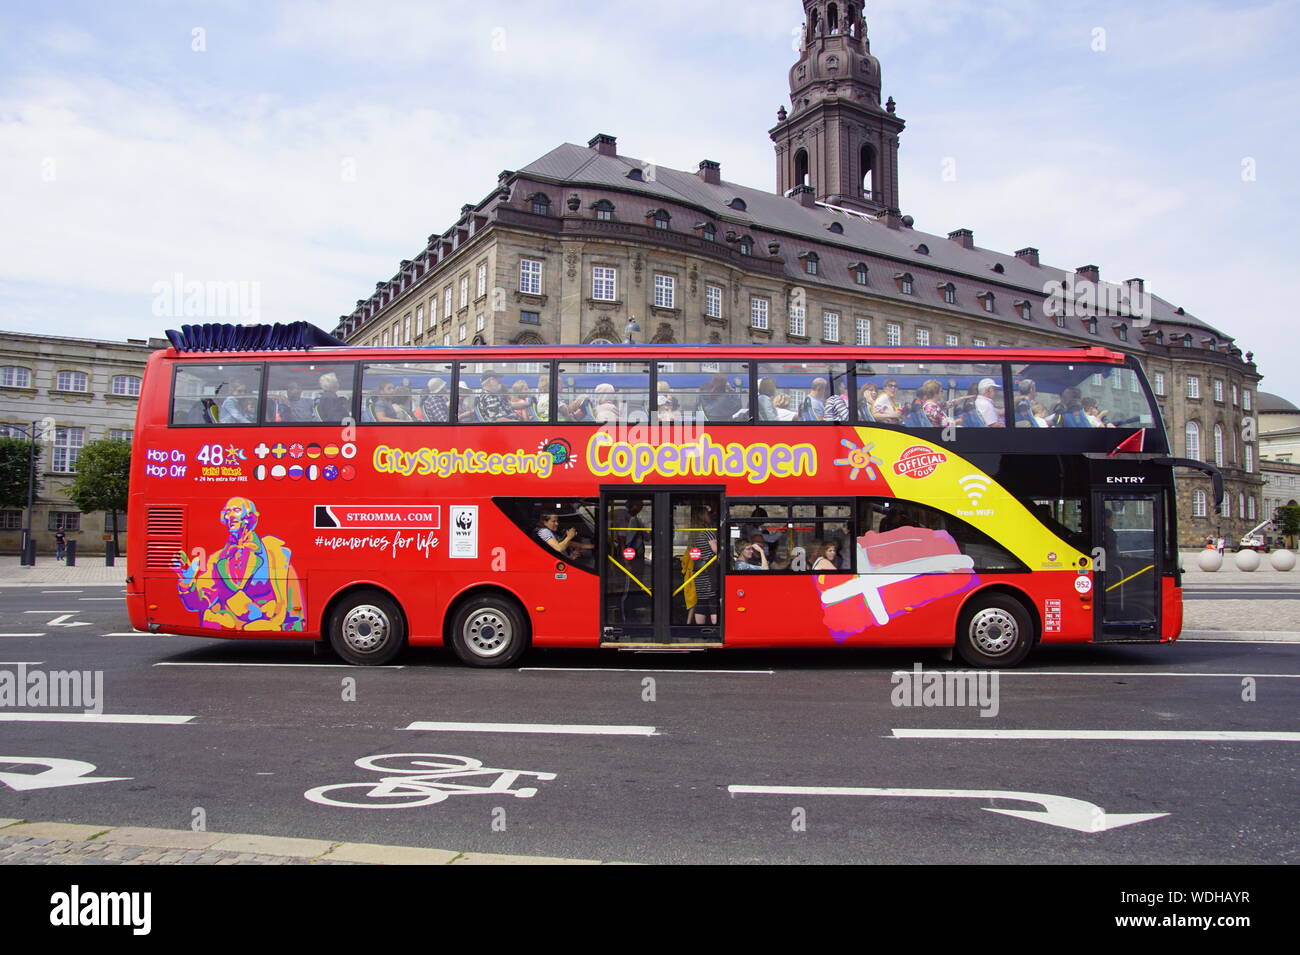 Copenhagen, Denmark - July 20, 2019: Unknown and unidentifiable  participants in a Red panorama double decker sightseeing tourist bus Stock  Photo - Alamy